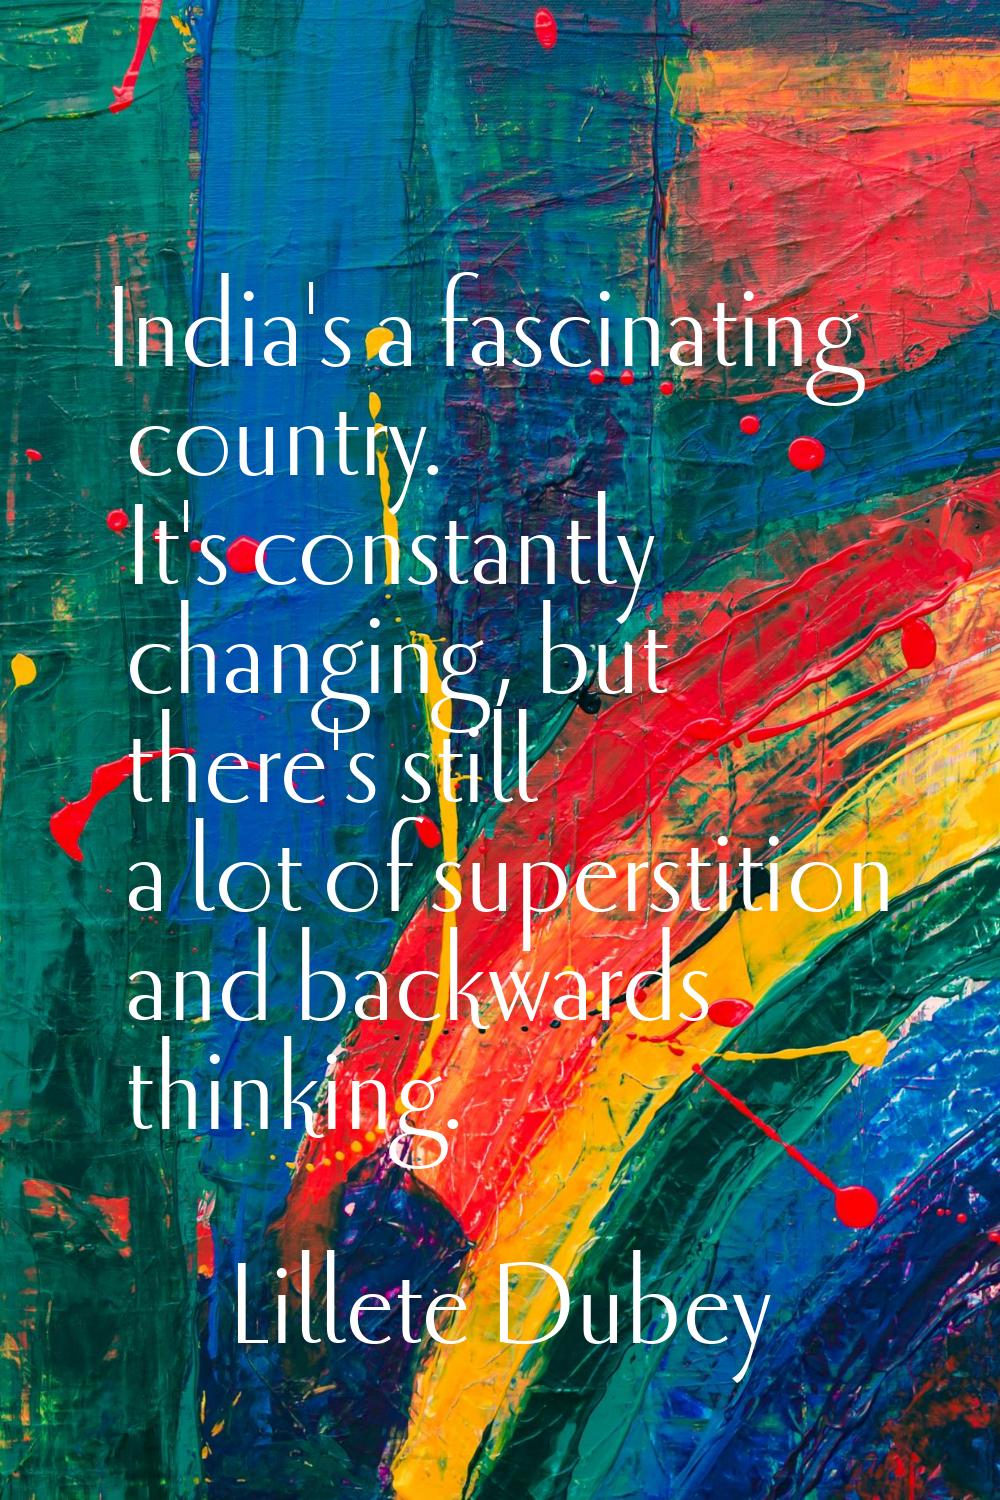 India's a fascinating country. It's constantly changing, but there's still a lot of superstition an